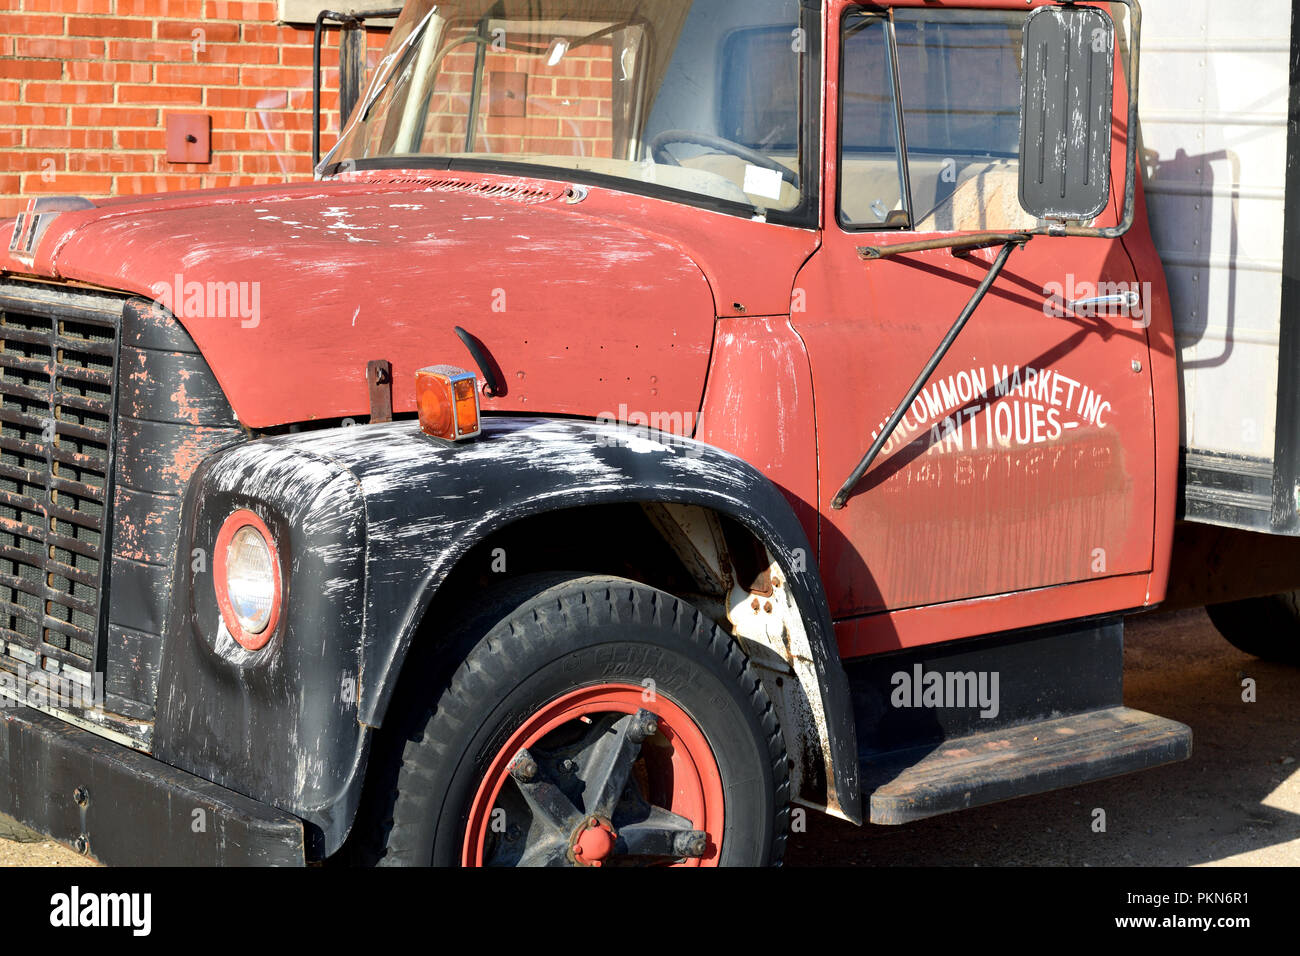 Vintage International Harvester truck from Uncommon Market Antique store Stock Photo